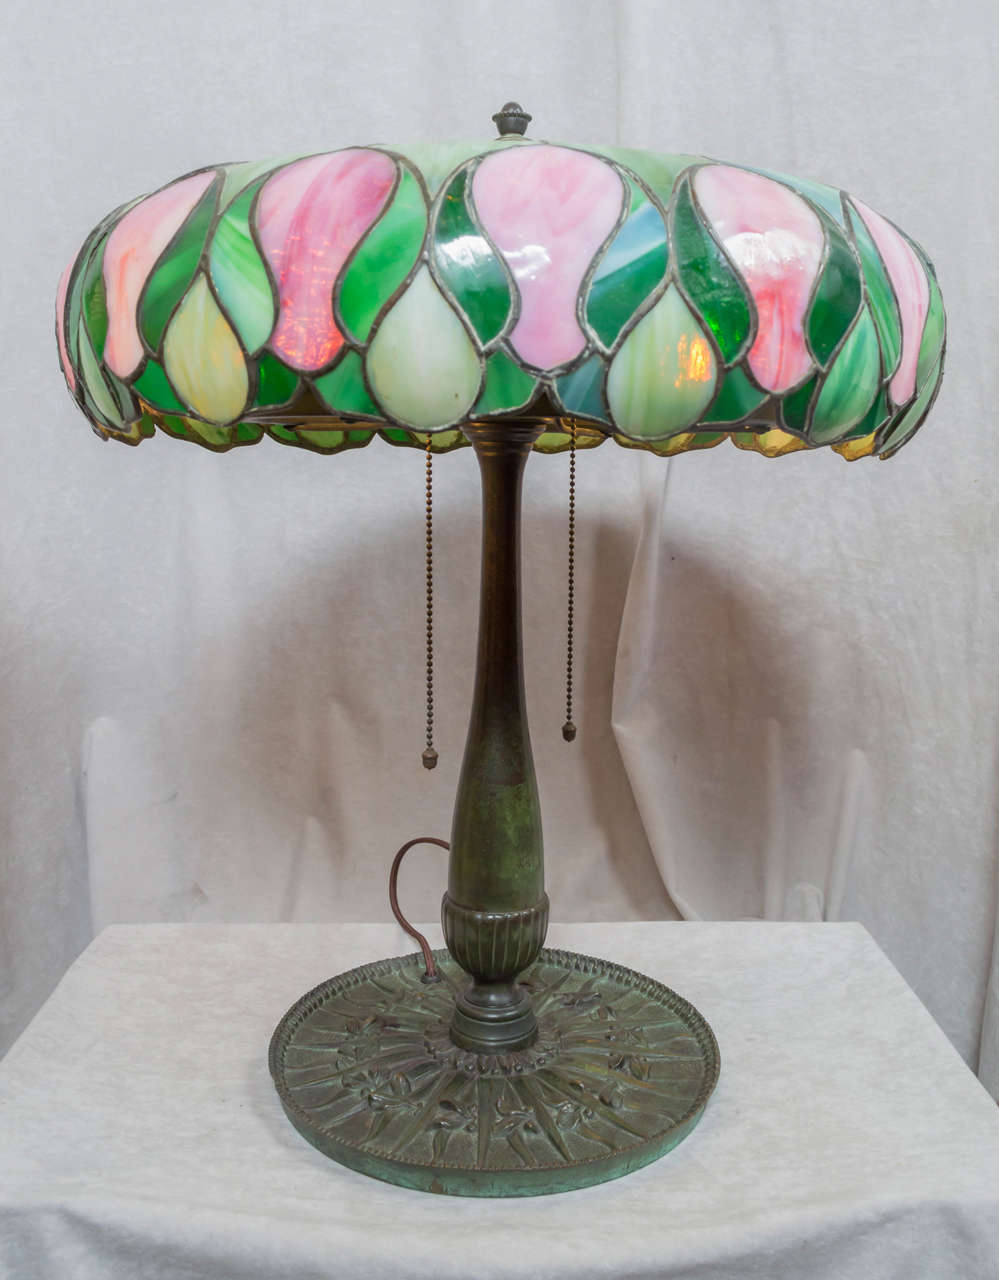 This is quite an unusual example of our favorite example of lamps, leaded glass. Most people do not realize that Tiffany was not the only maker of these lamps. We know for sure that this lamp was designed and executed by the ''Suess Co., Chicago IL.